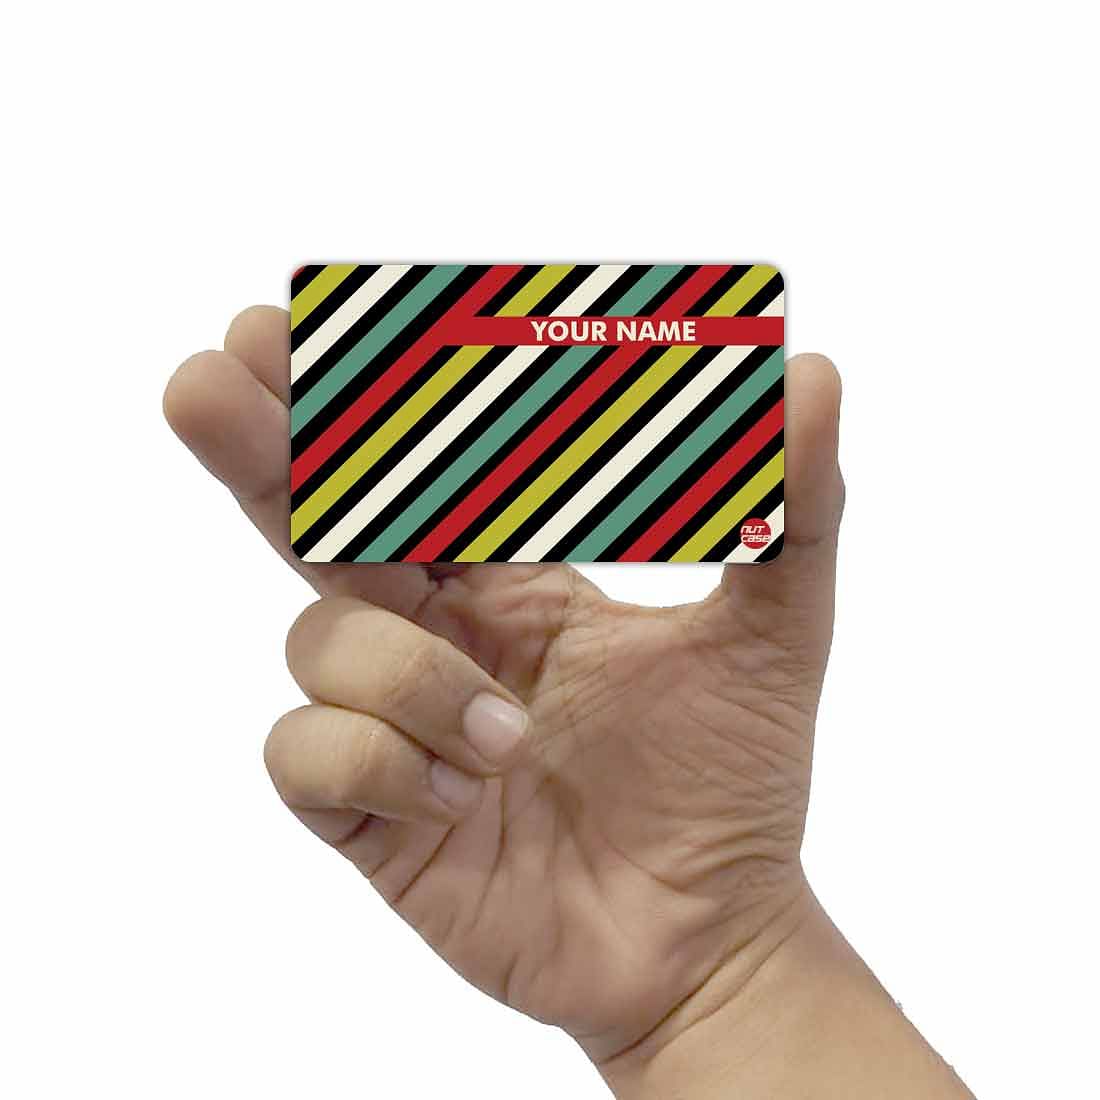 Customized NFC Chip Business Cards -  Red Green Strip Nutcase